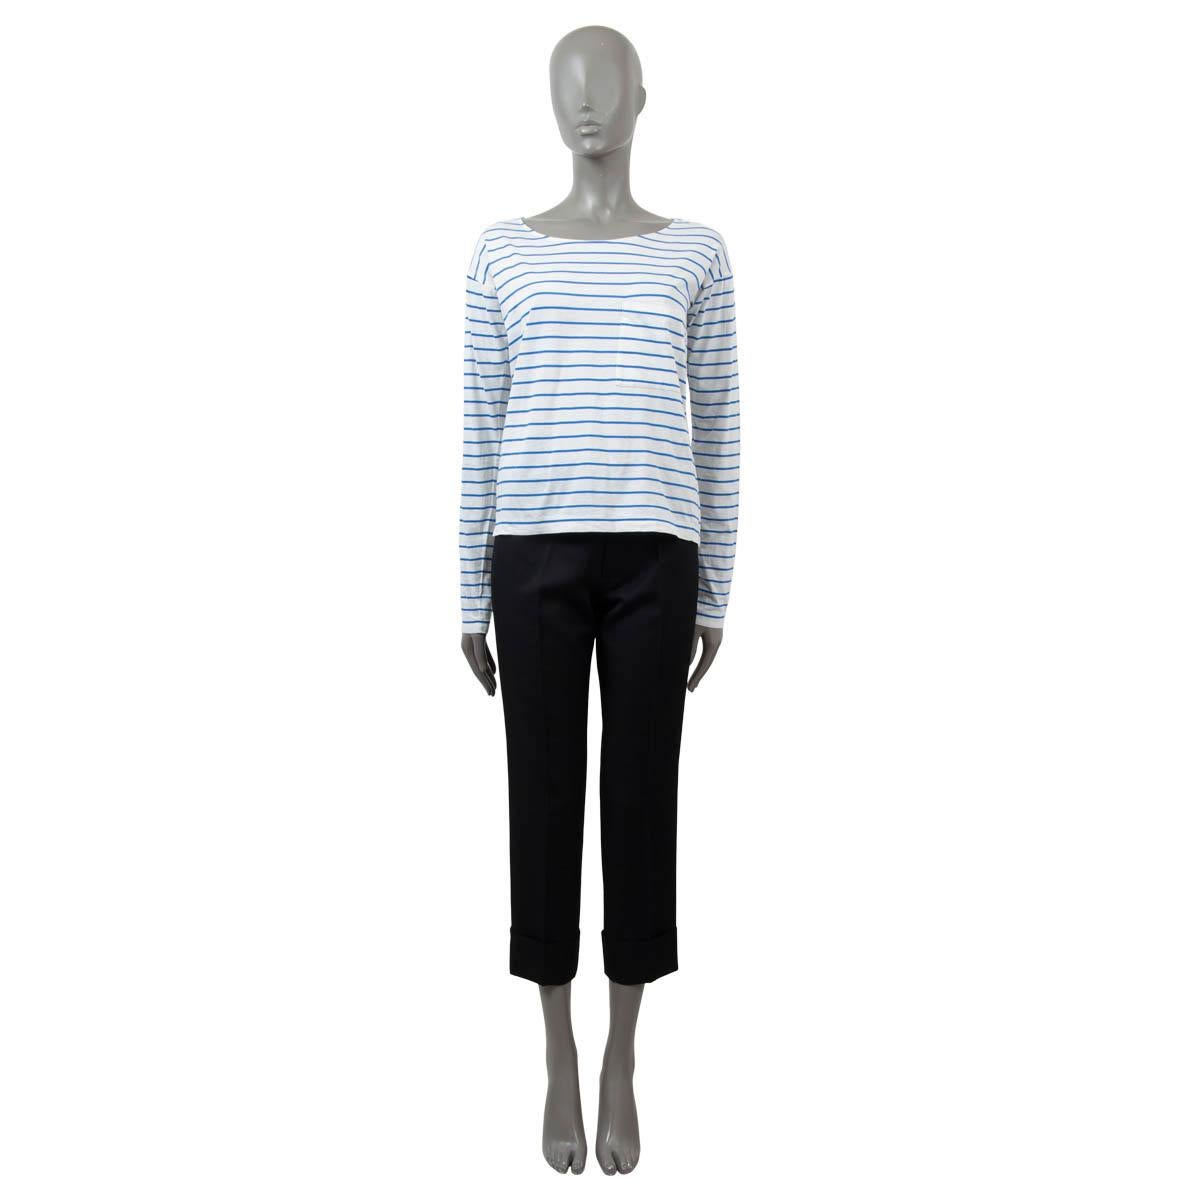 100% authentic Prada striped long sleeve shirt in cotton jersey (100%) blue and white. Features boat neck and one chest pocket. Has bee worn and is in excellent condition. 

Measurements
Tag Size	XS
Size	XS
Shoulder Width	54cm (21.1in)
Bust To	98cm